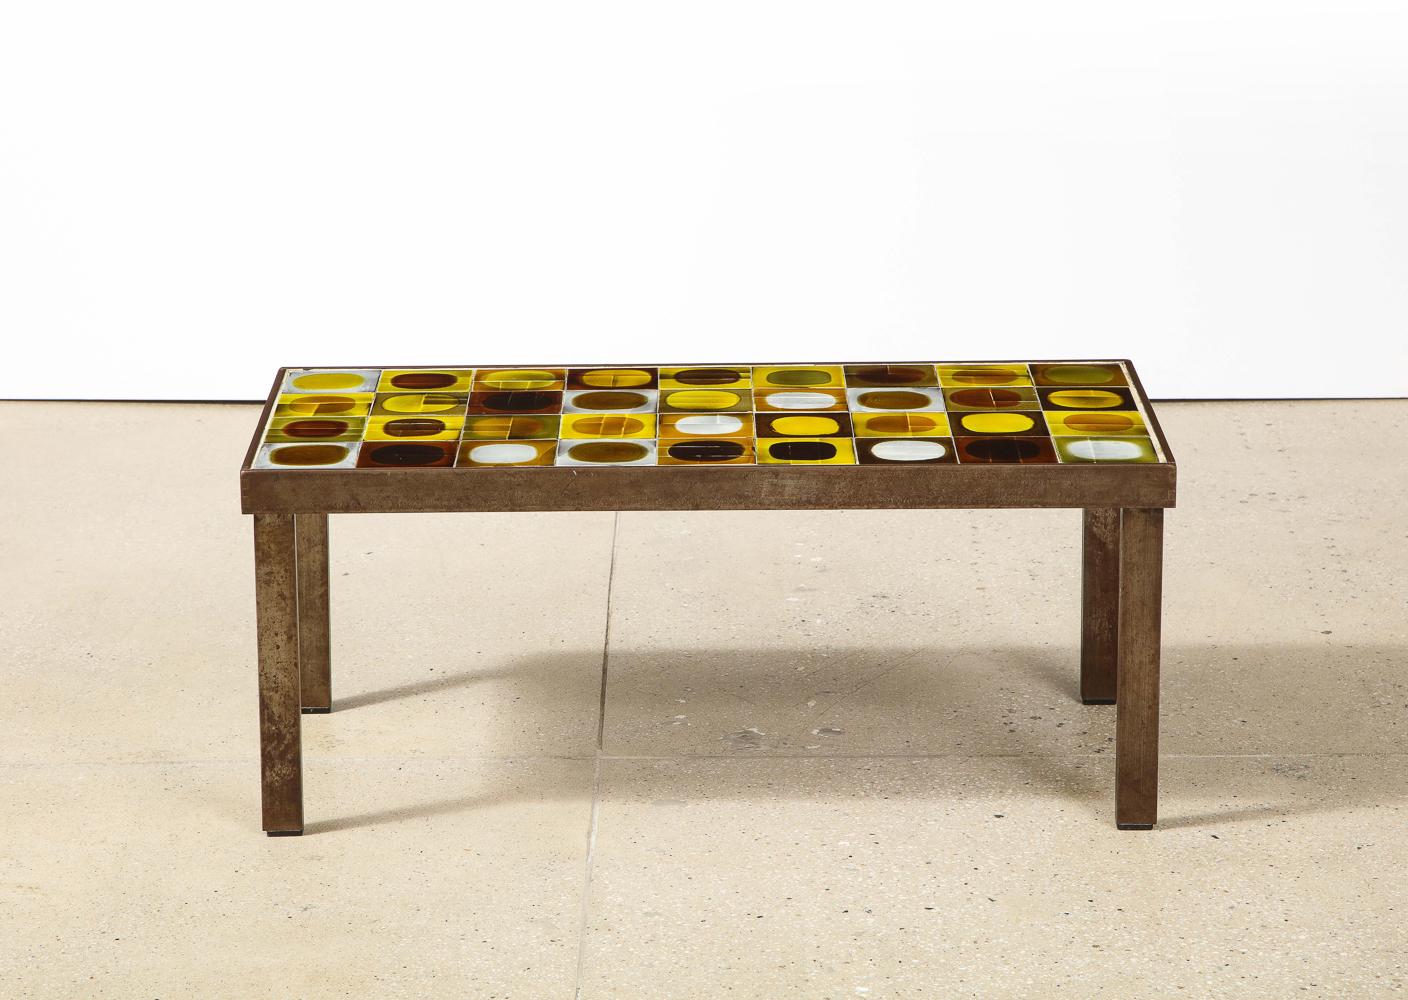 Early cocktail table by Roger Capron. Oxidized steel frame and glazed ceramic tiles. Great abstraction and colors. Artist signed. Very good original condition with overall wear to base.